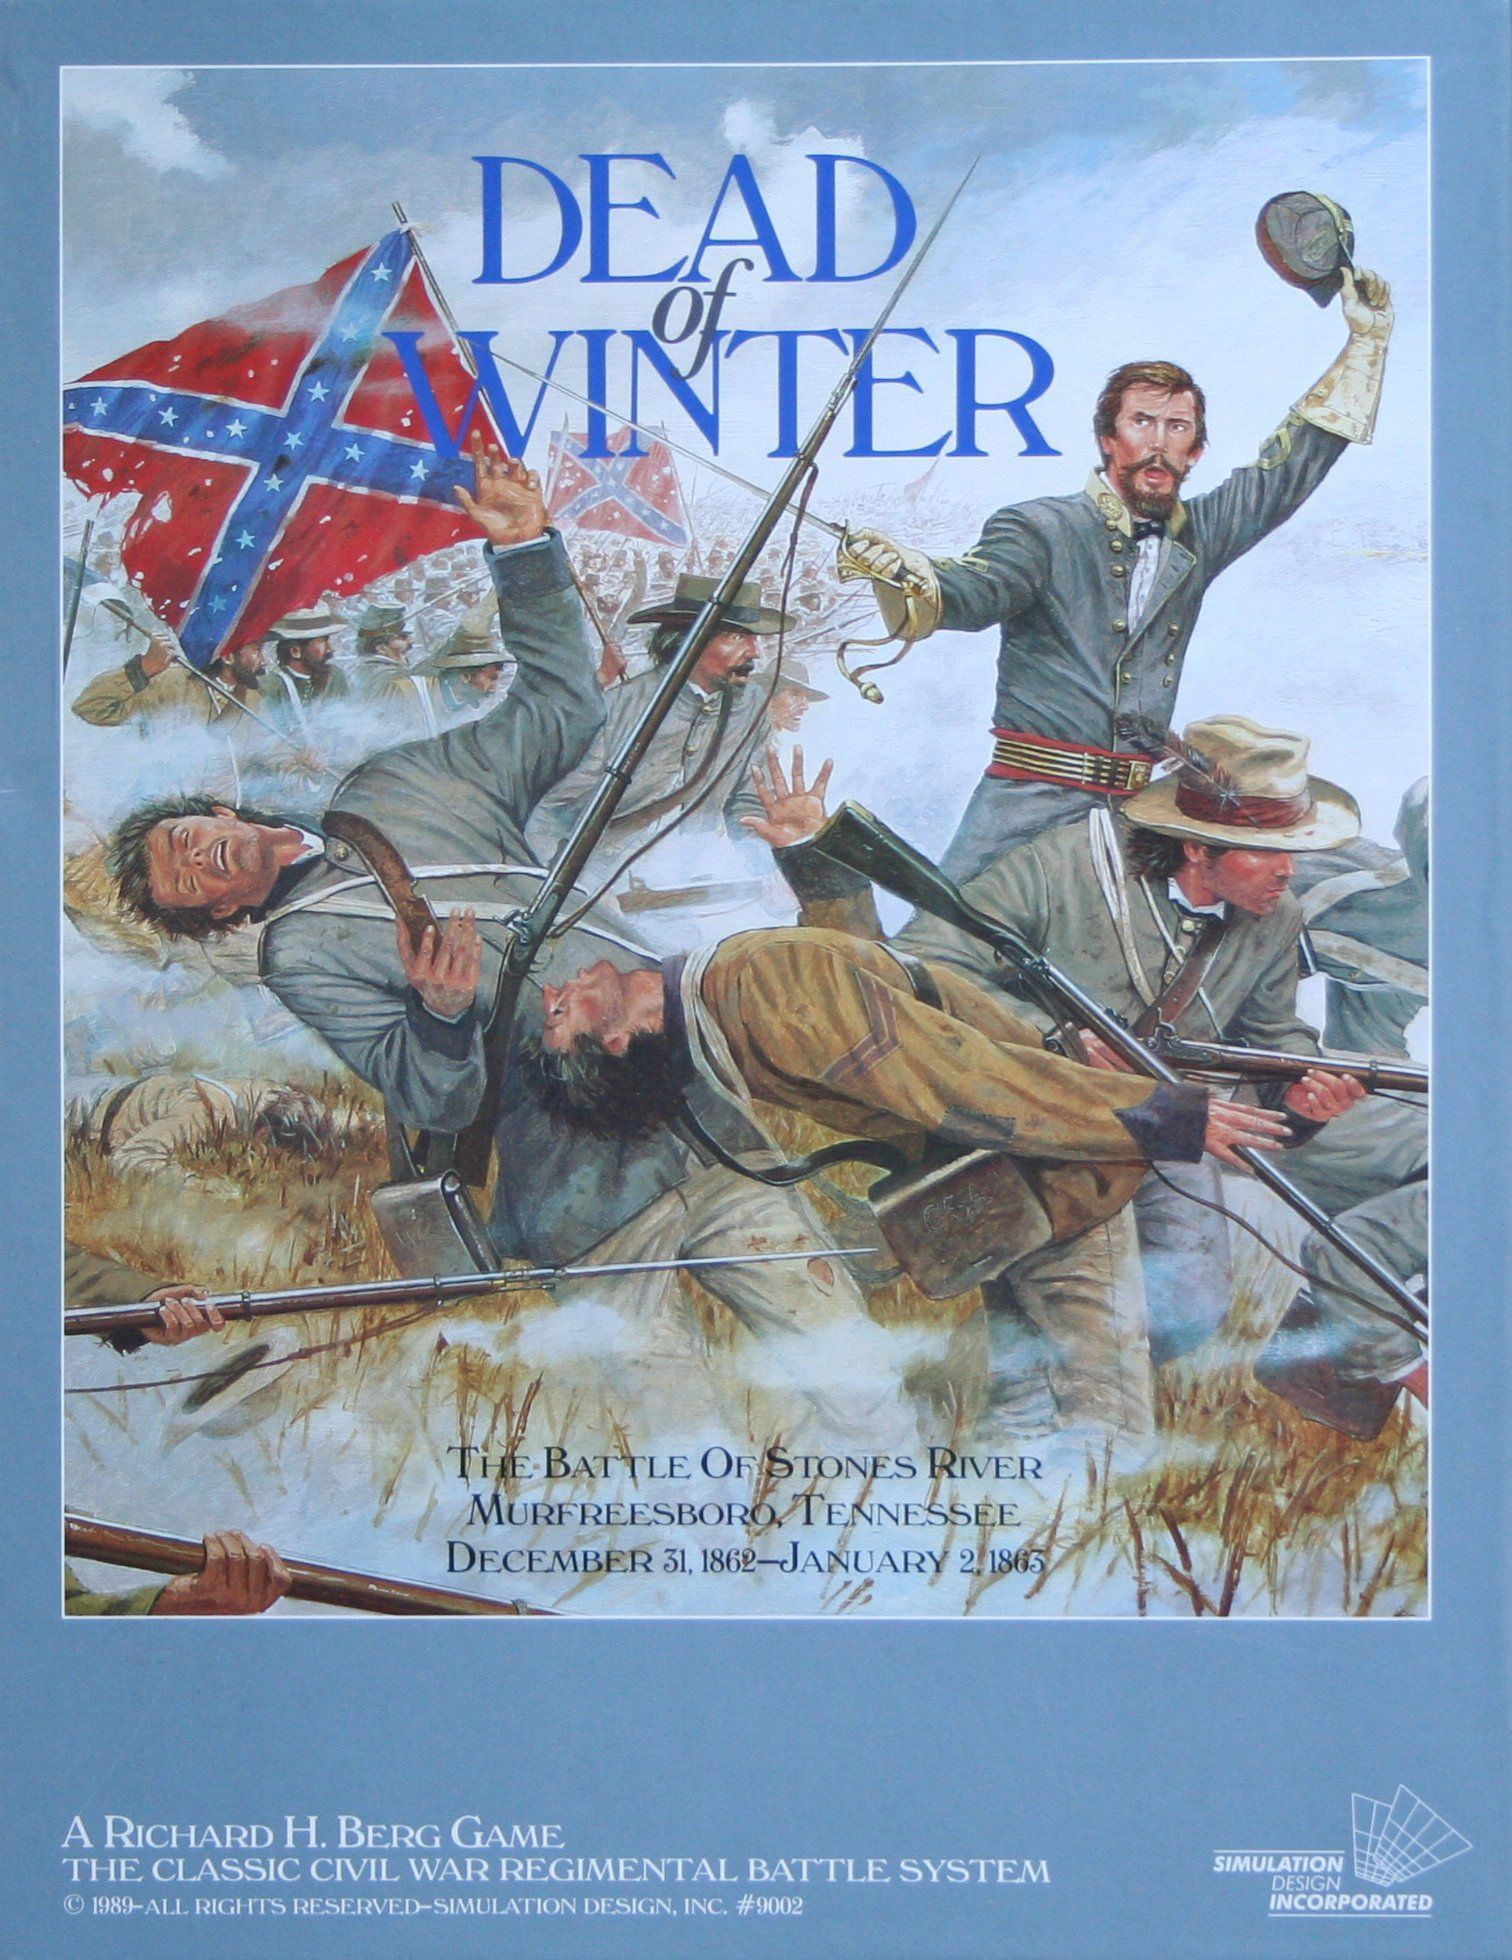 Dead of Winter (first edition)